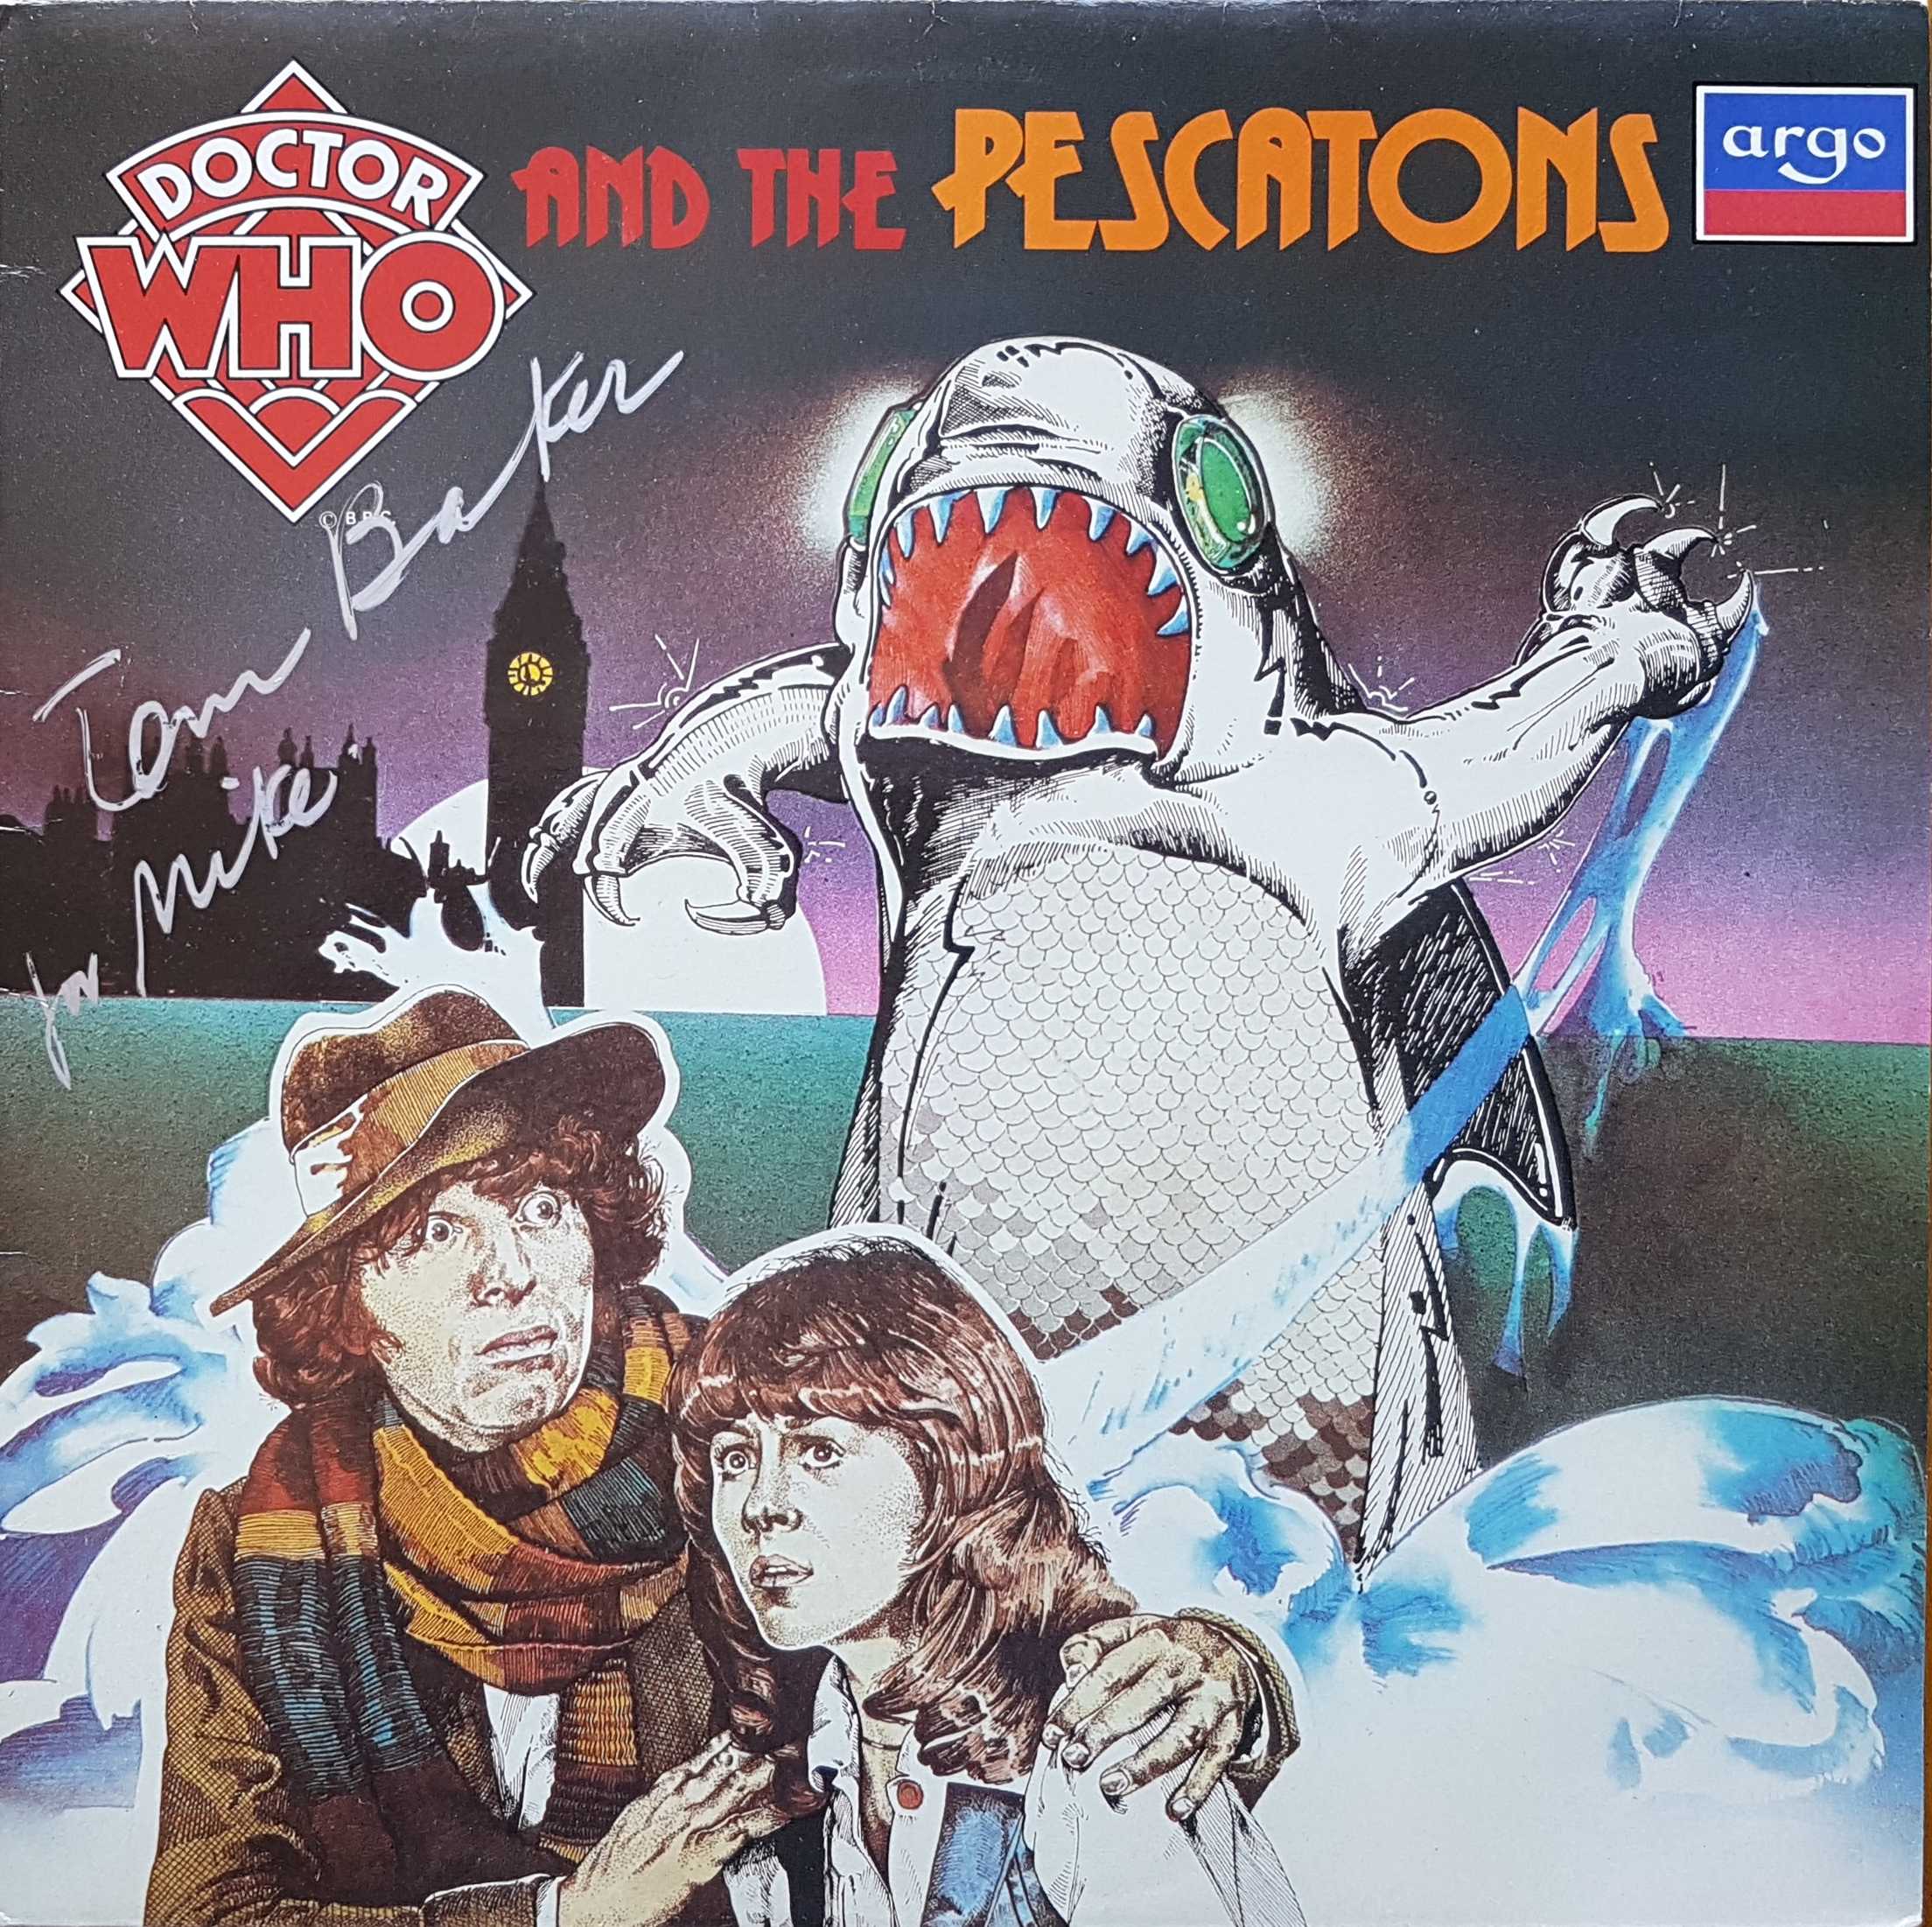 Picture of 414459 1 Doctor who and the Prescatons by artist Victor Pembleton from the BBC records and Tapes library